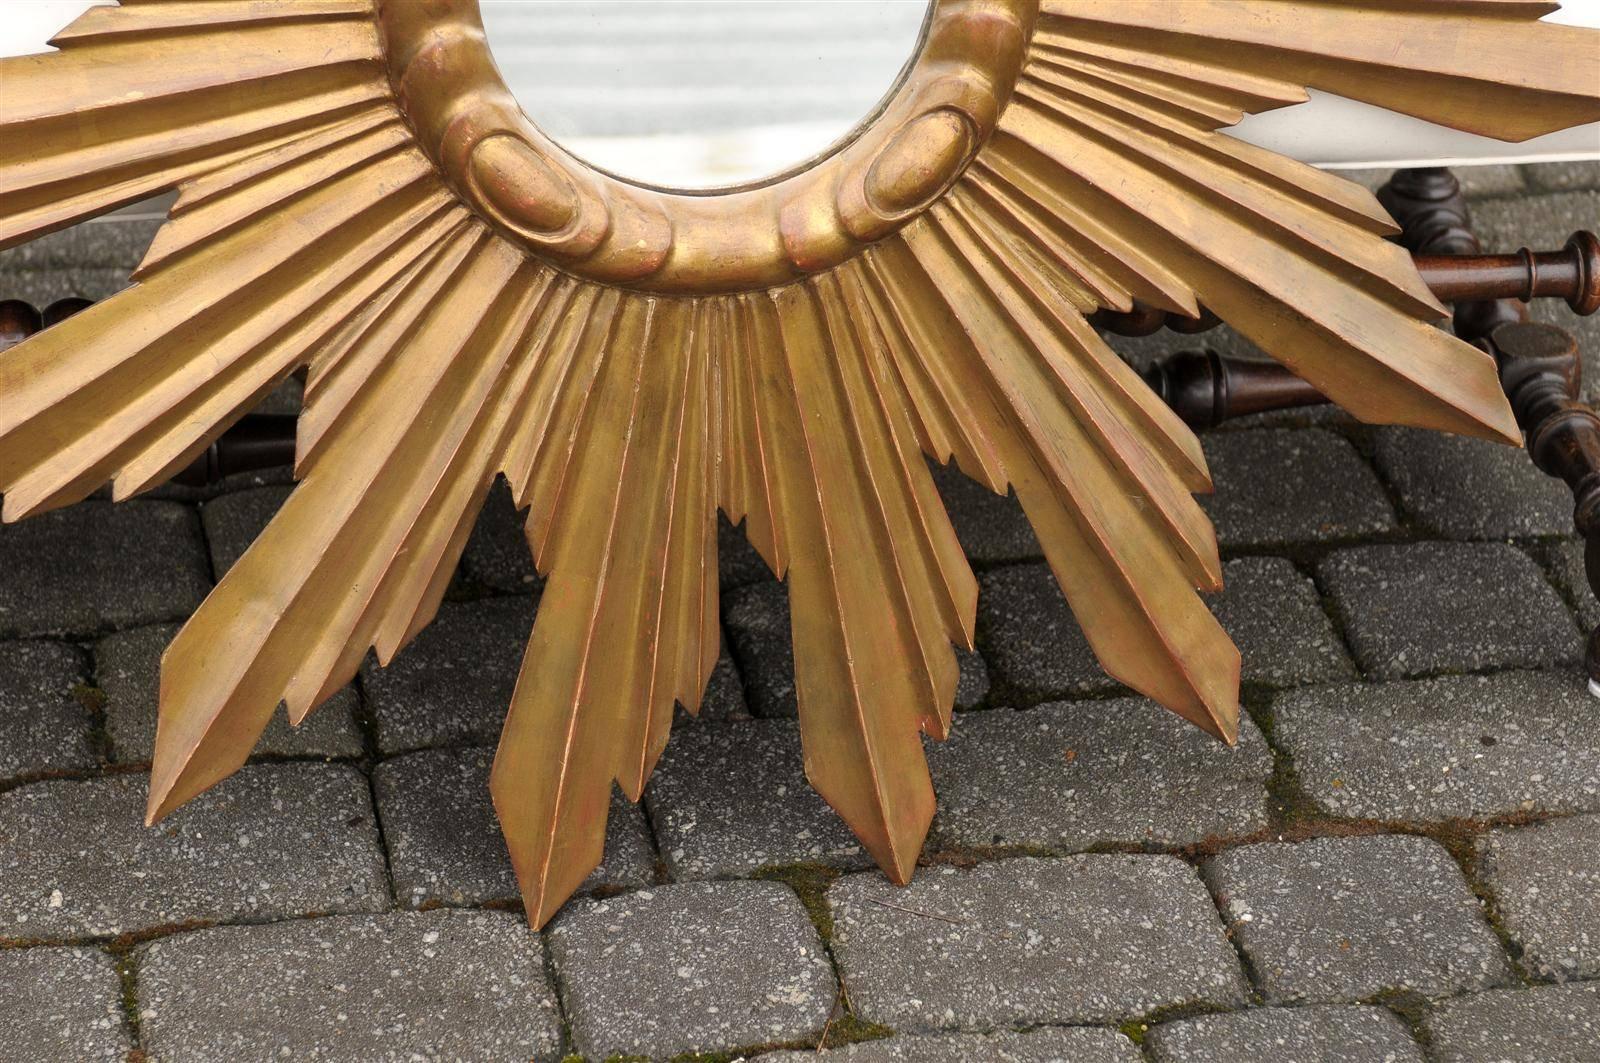 French Large Size Sunburst Mirror from the 1940s with Sunrays of Varying Sizes For Sale 3